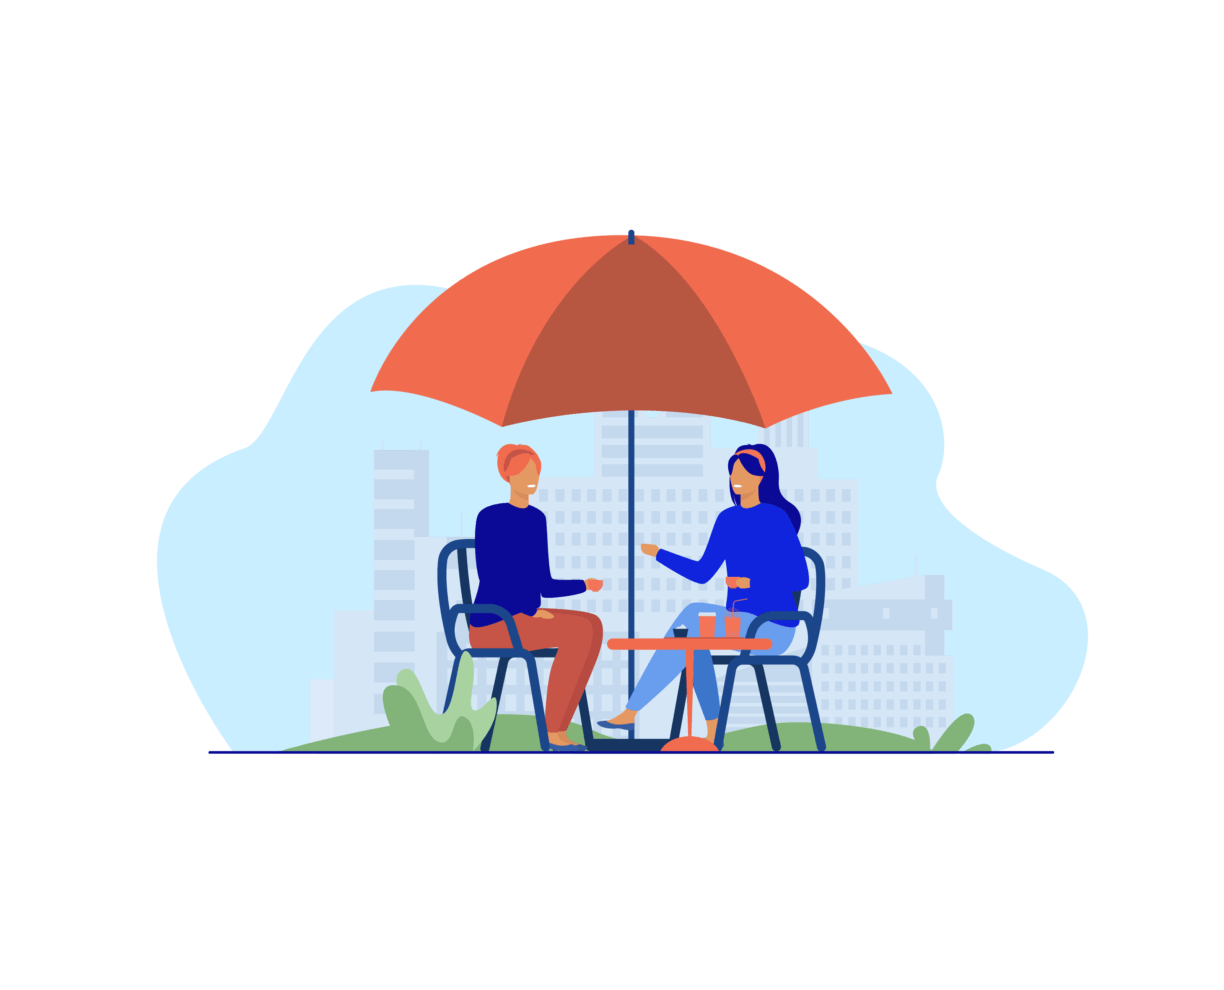 Illustration of two people catching up under an umbrella